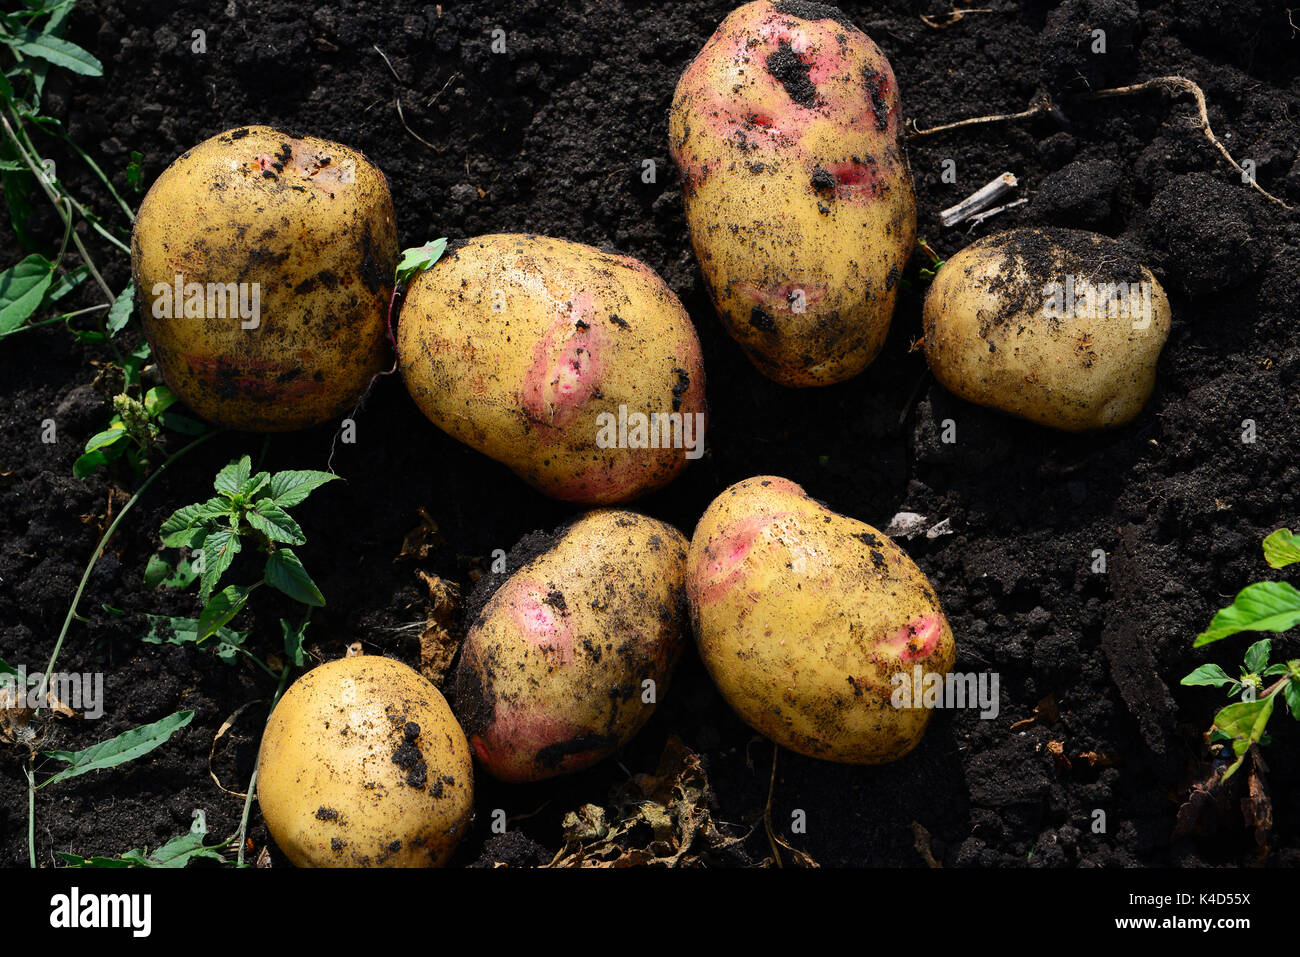 Potatoes of early varieties lie on ground Stock Photo